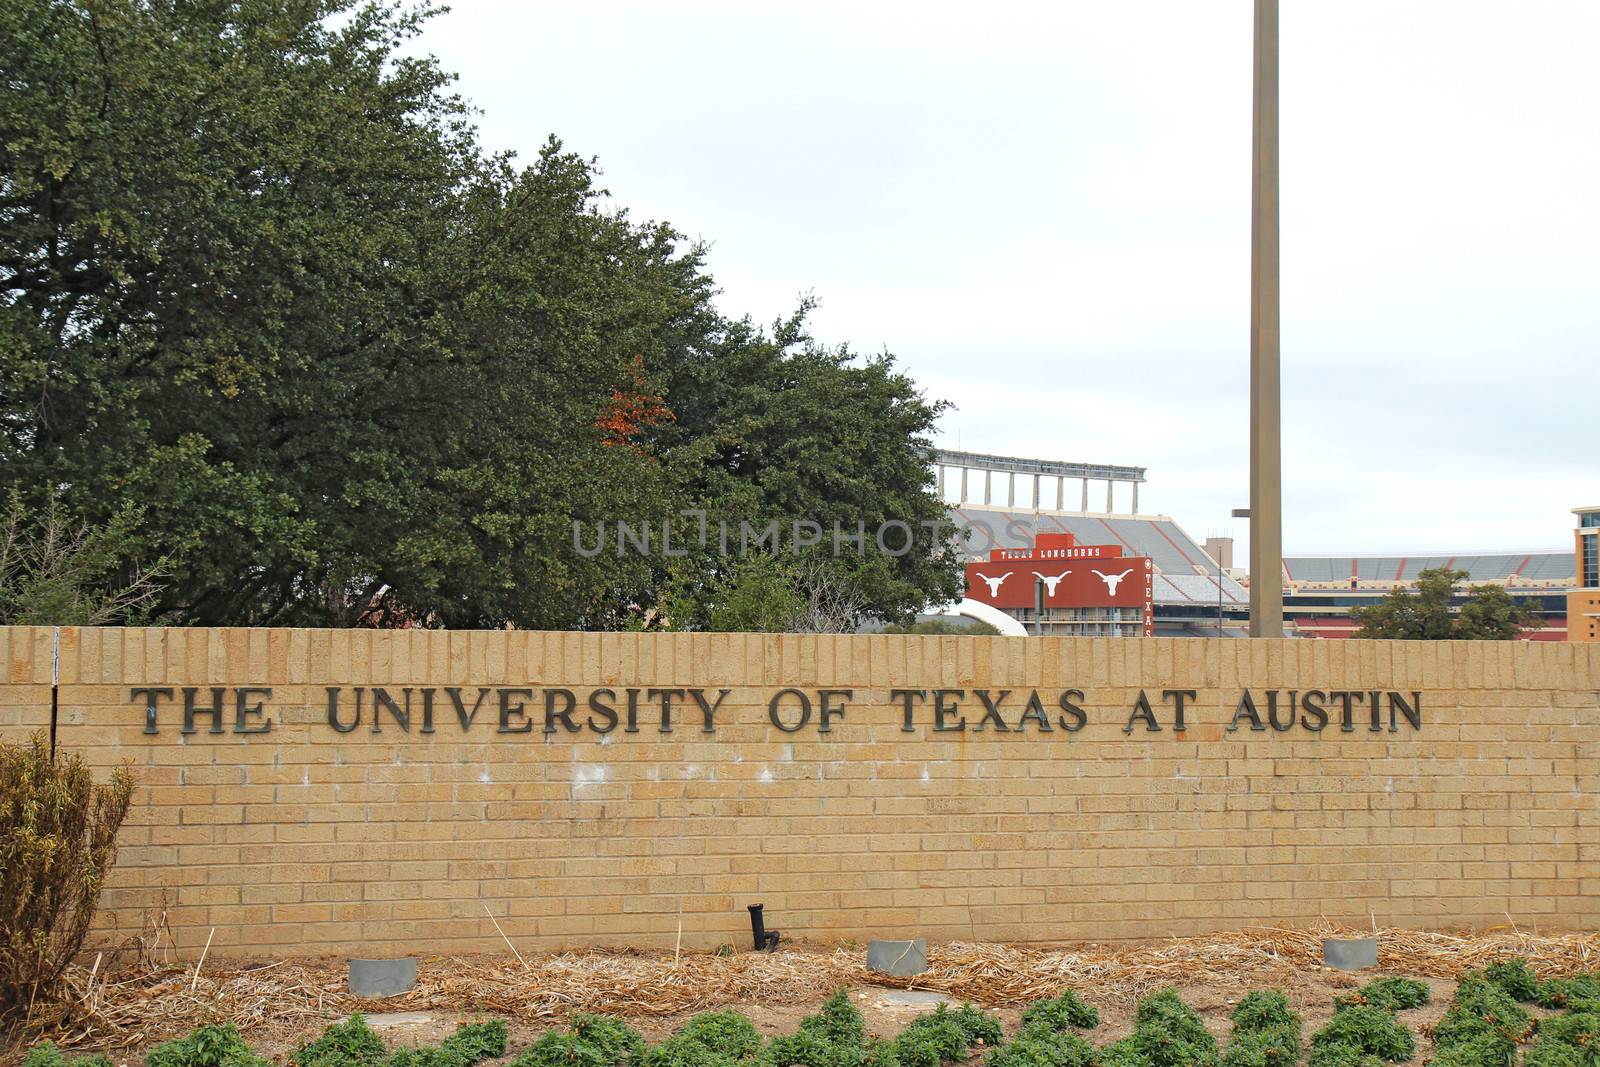 AUSTIN, TEXAS - FEBRUARY 2 2014: Sign for the University of Texas at Austin with Darrell K Royal-Texas Memorial Stadium in the background. Founded in 1883, it is one of the top 20 schools in the USA.